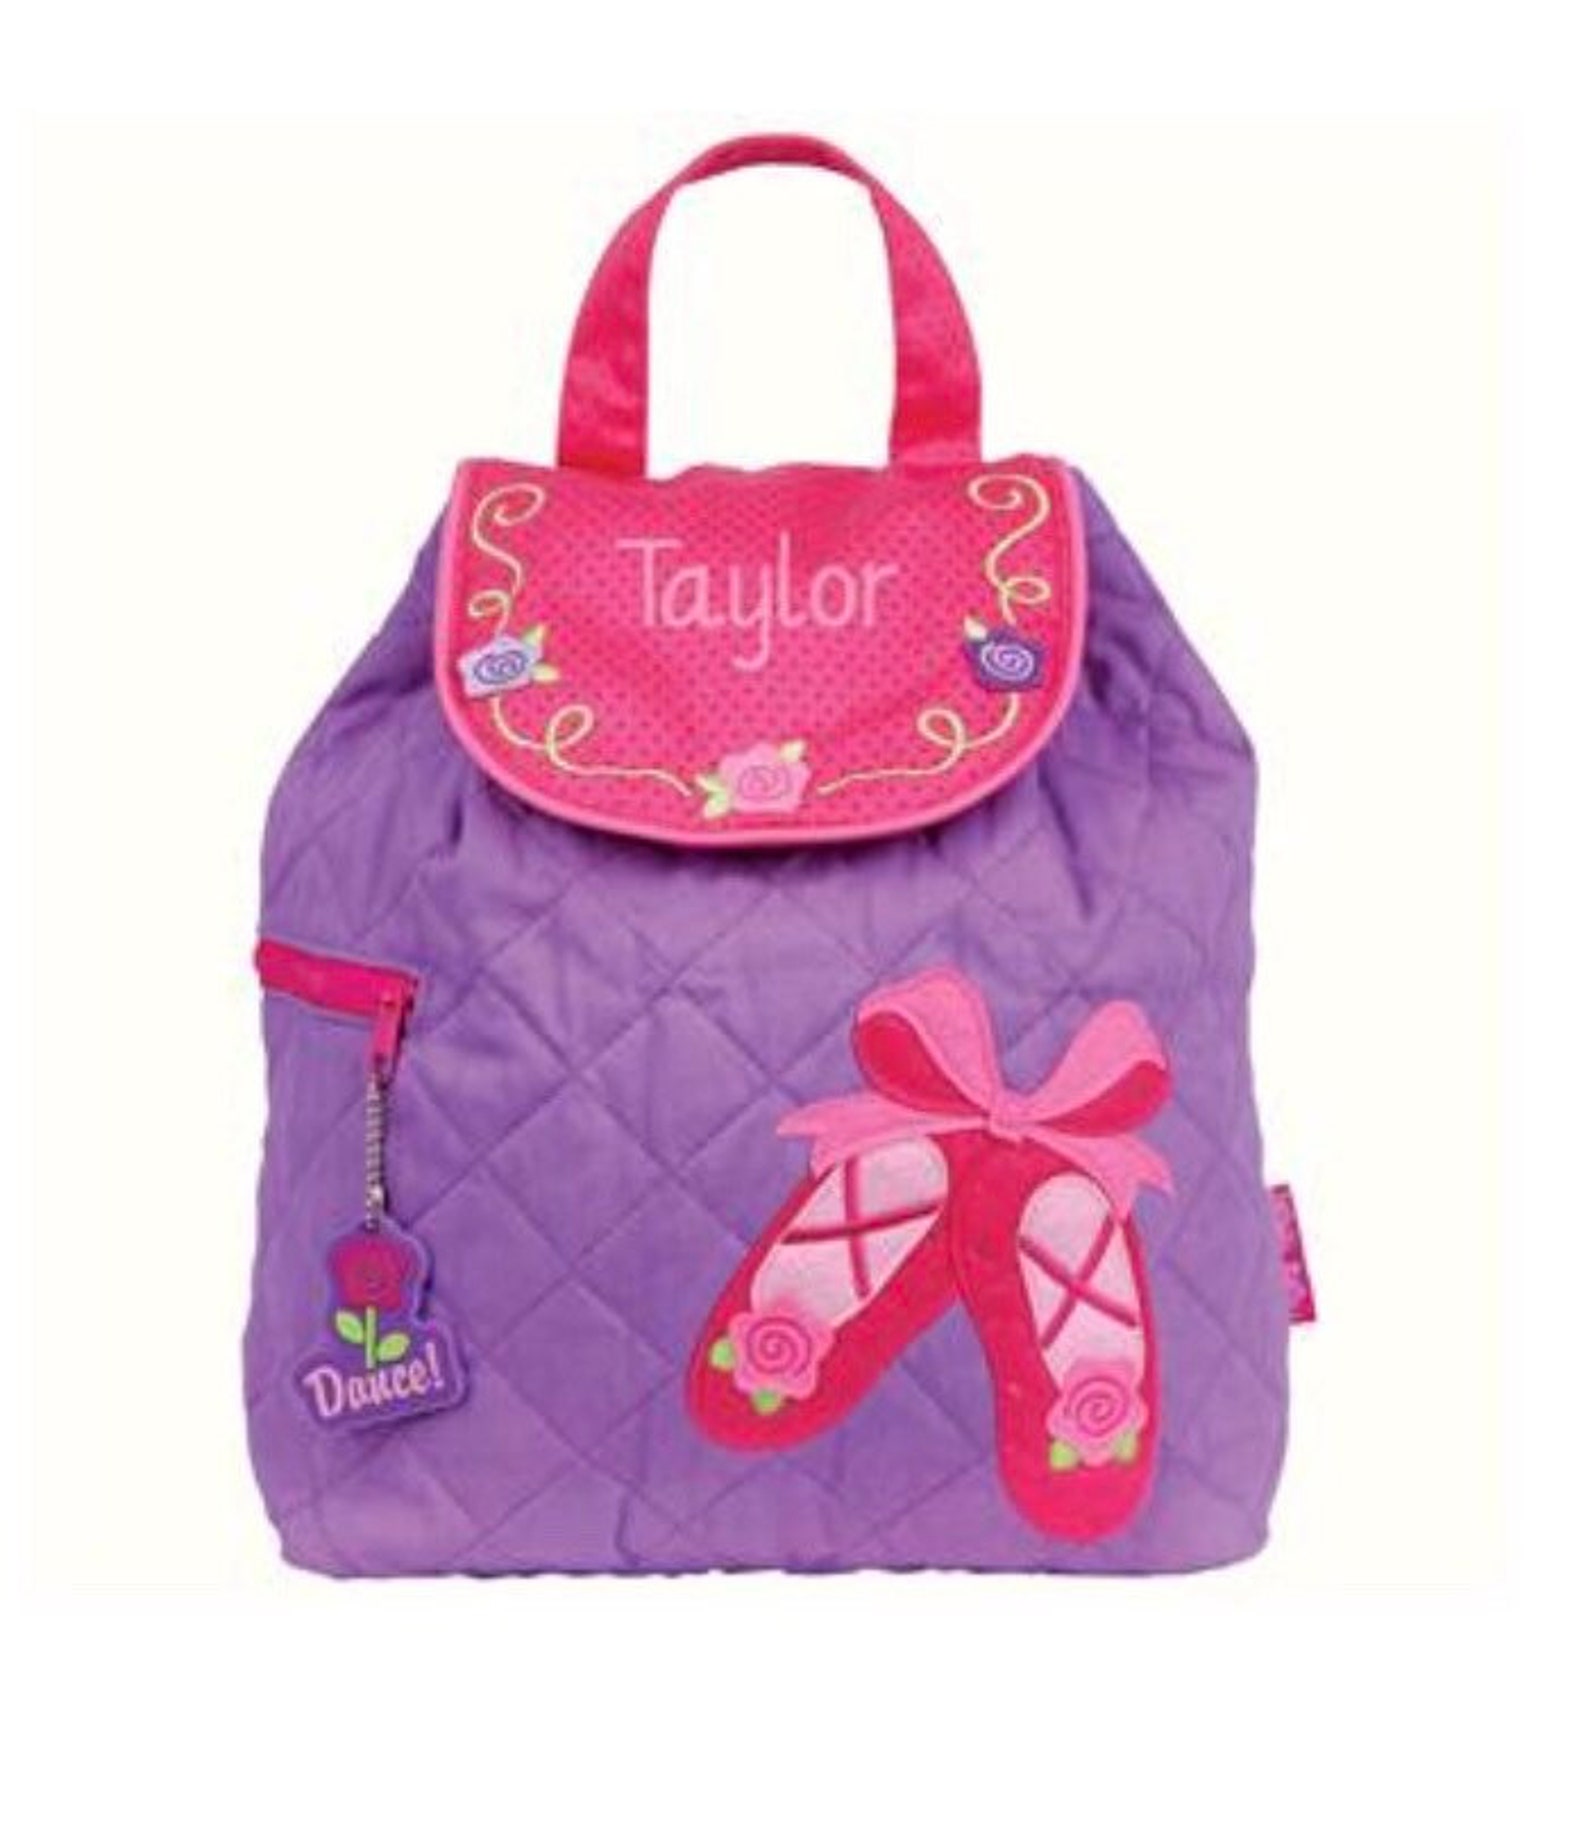 personalised toddler backpack in ballet shoe design with embroidered name.